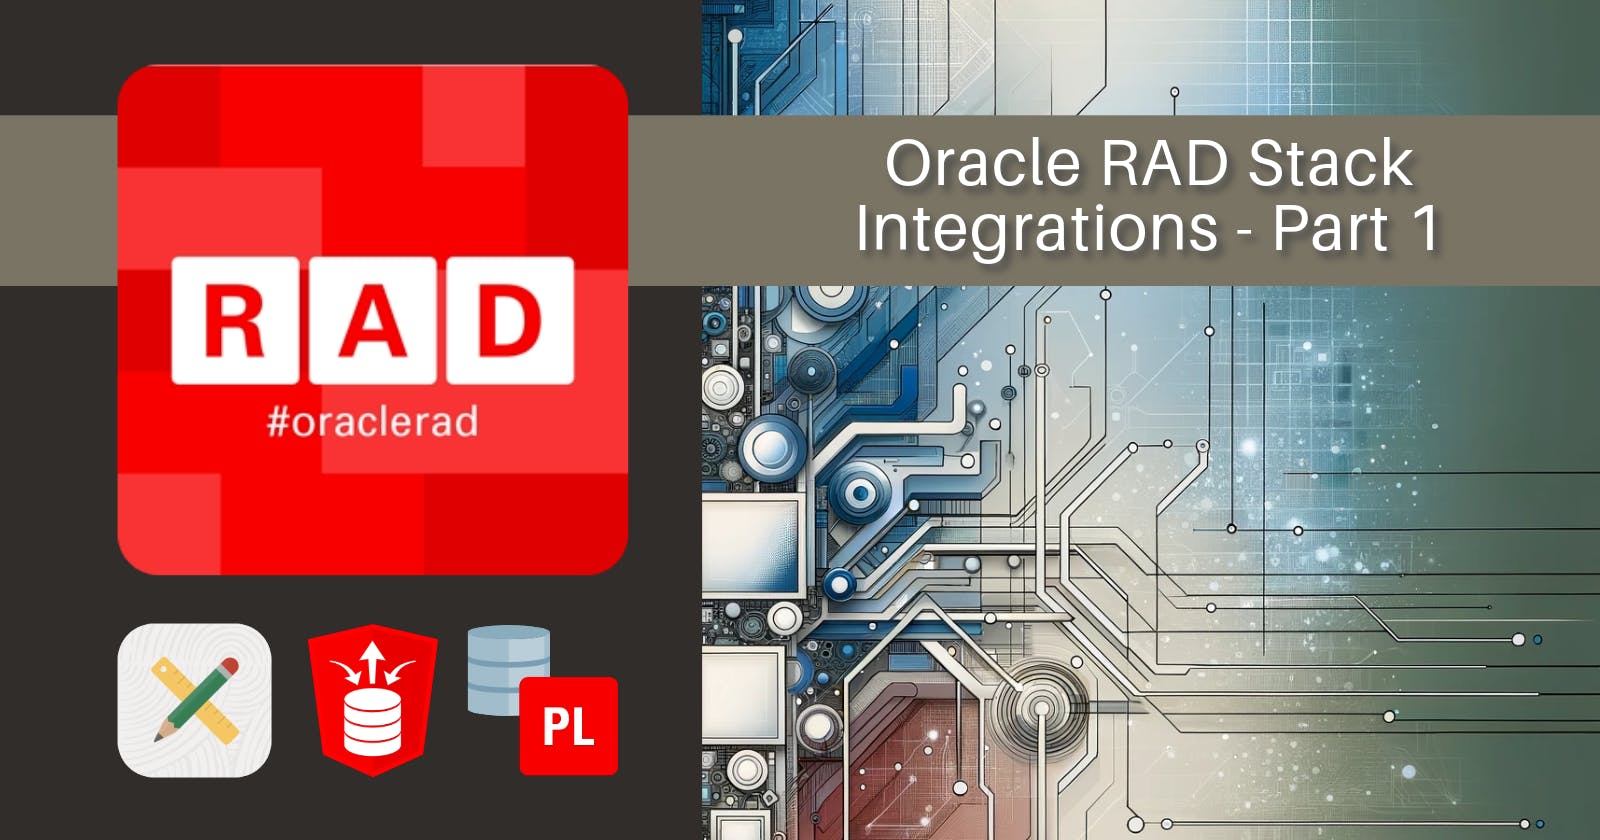 Building Integrations with the Oracle DB APEX & ORDS - Part 1